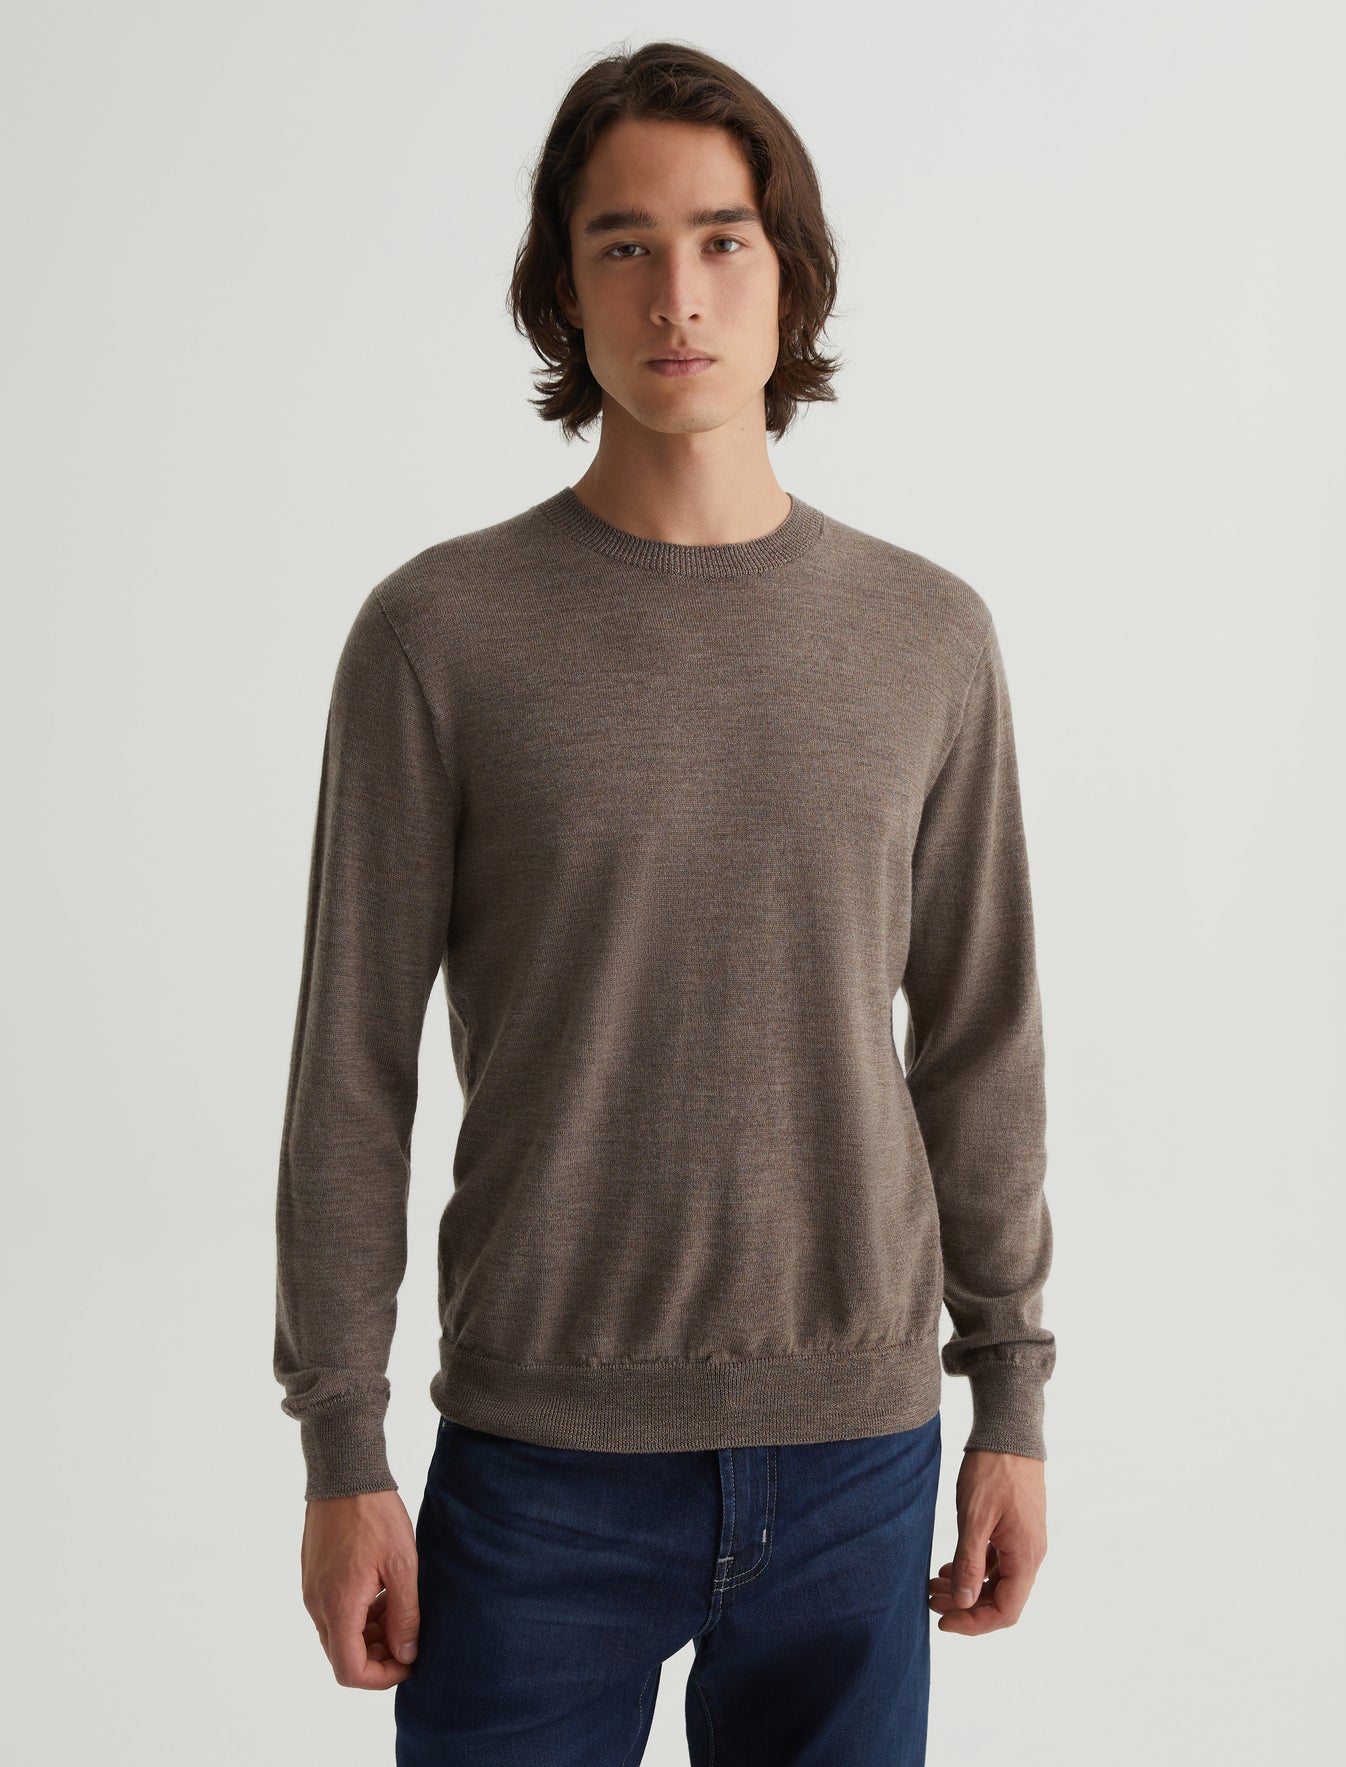 Beck Crew Melange Taupe Classic Fit Long Sleeve Crew Neck Sweater Mens Top Photo 1